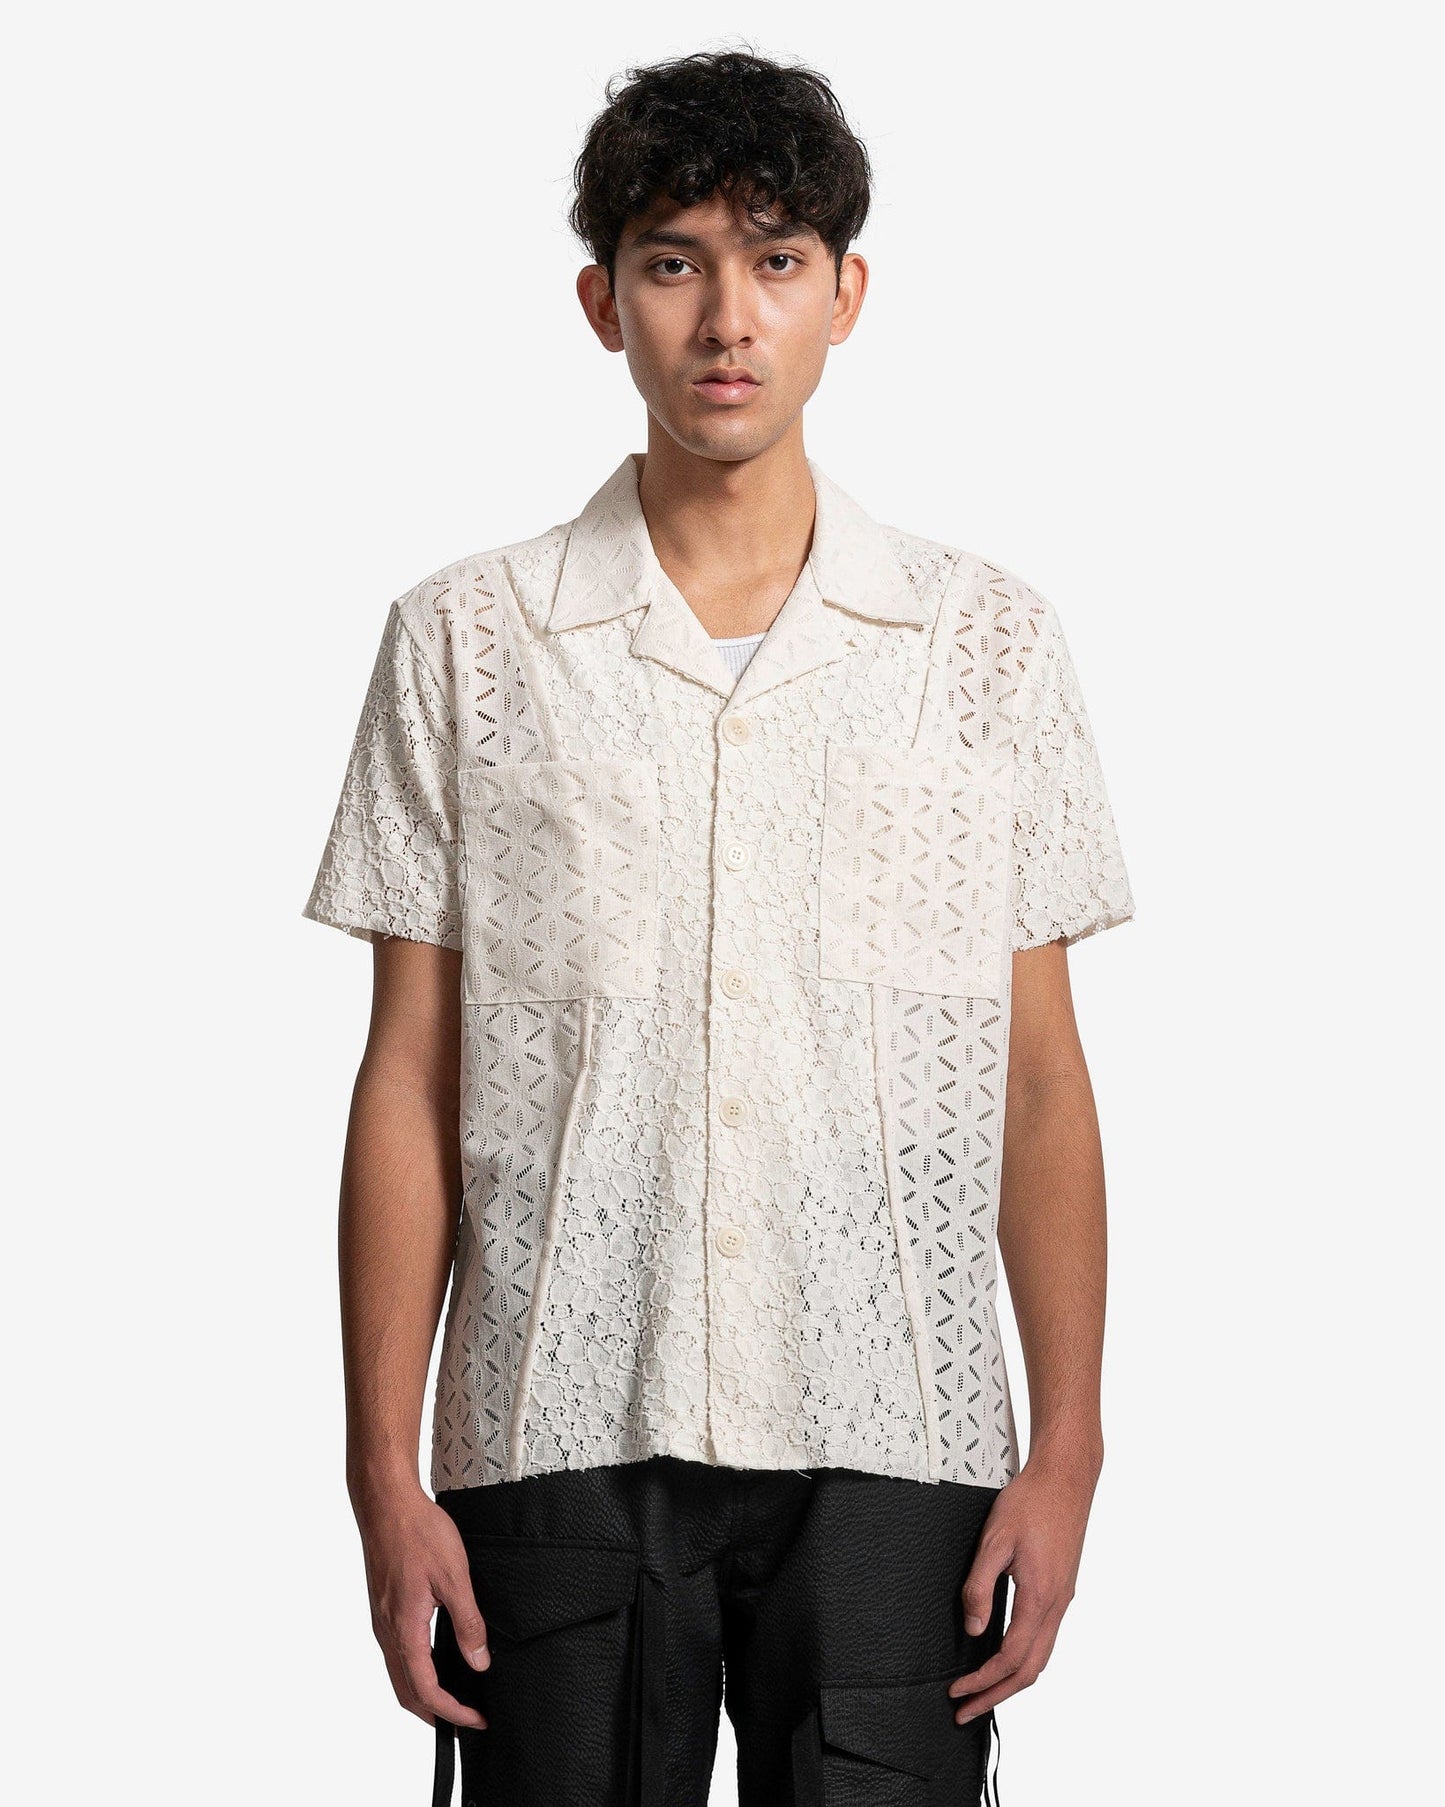 Andersson Bell Men's Shirts Half Sheer Flower Lace Shirt in Ecru